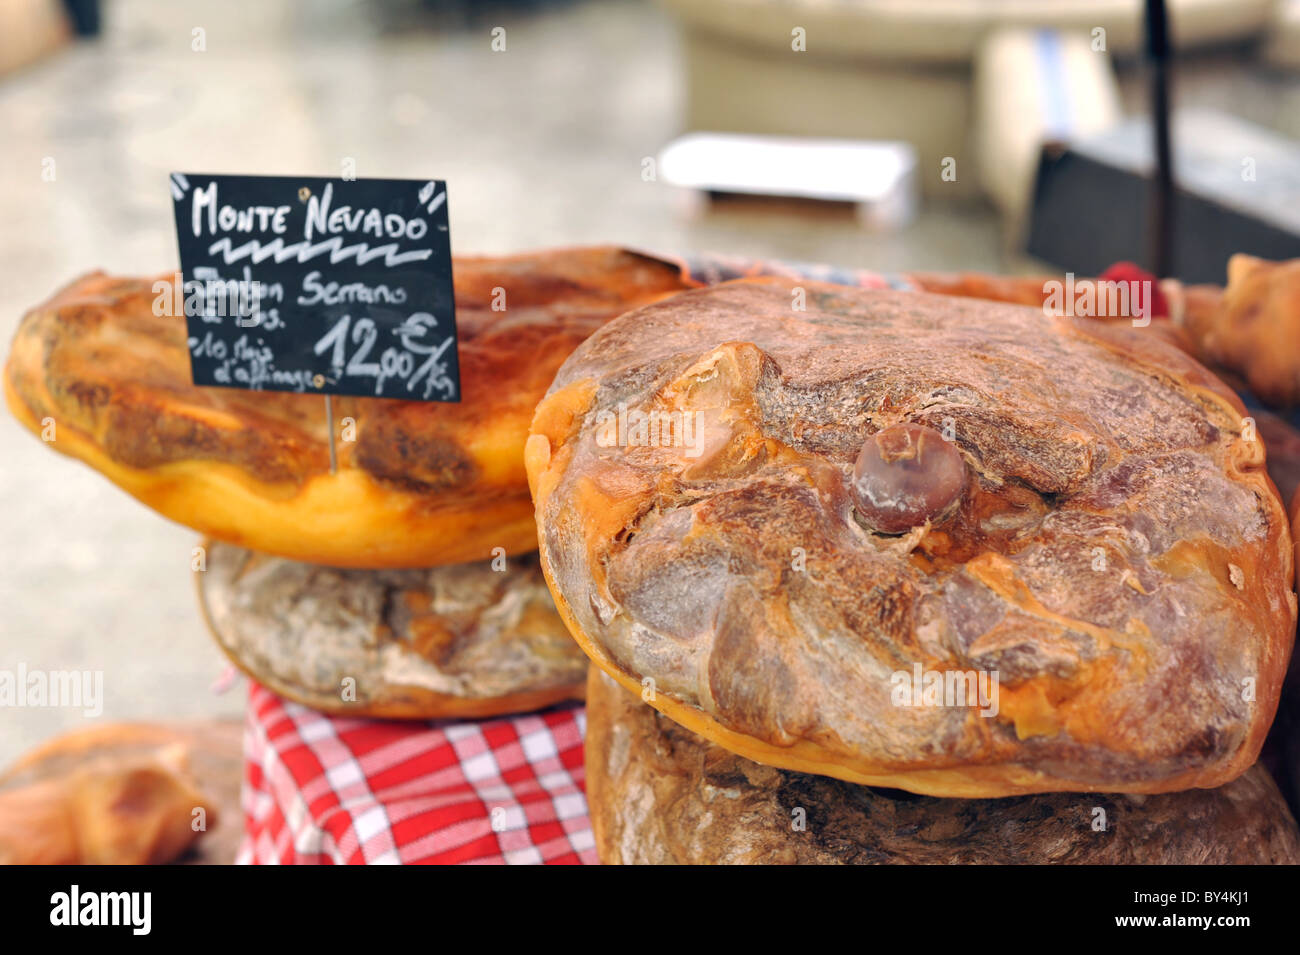 Cured pork or ham for sale at a French Street market Stock Photo